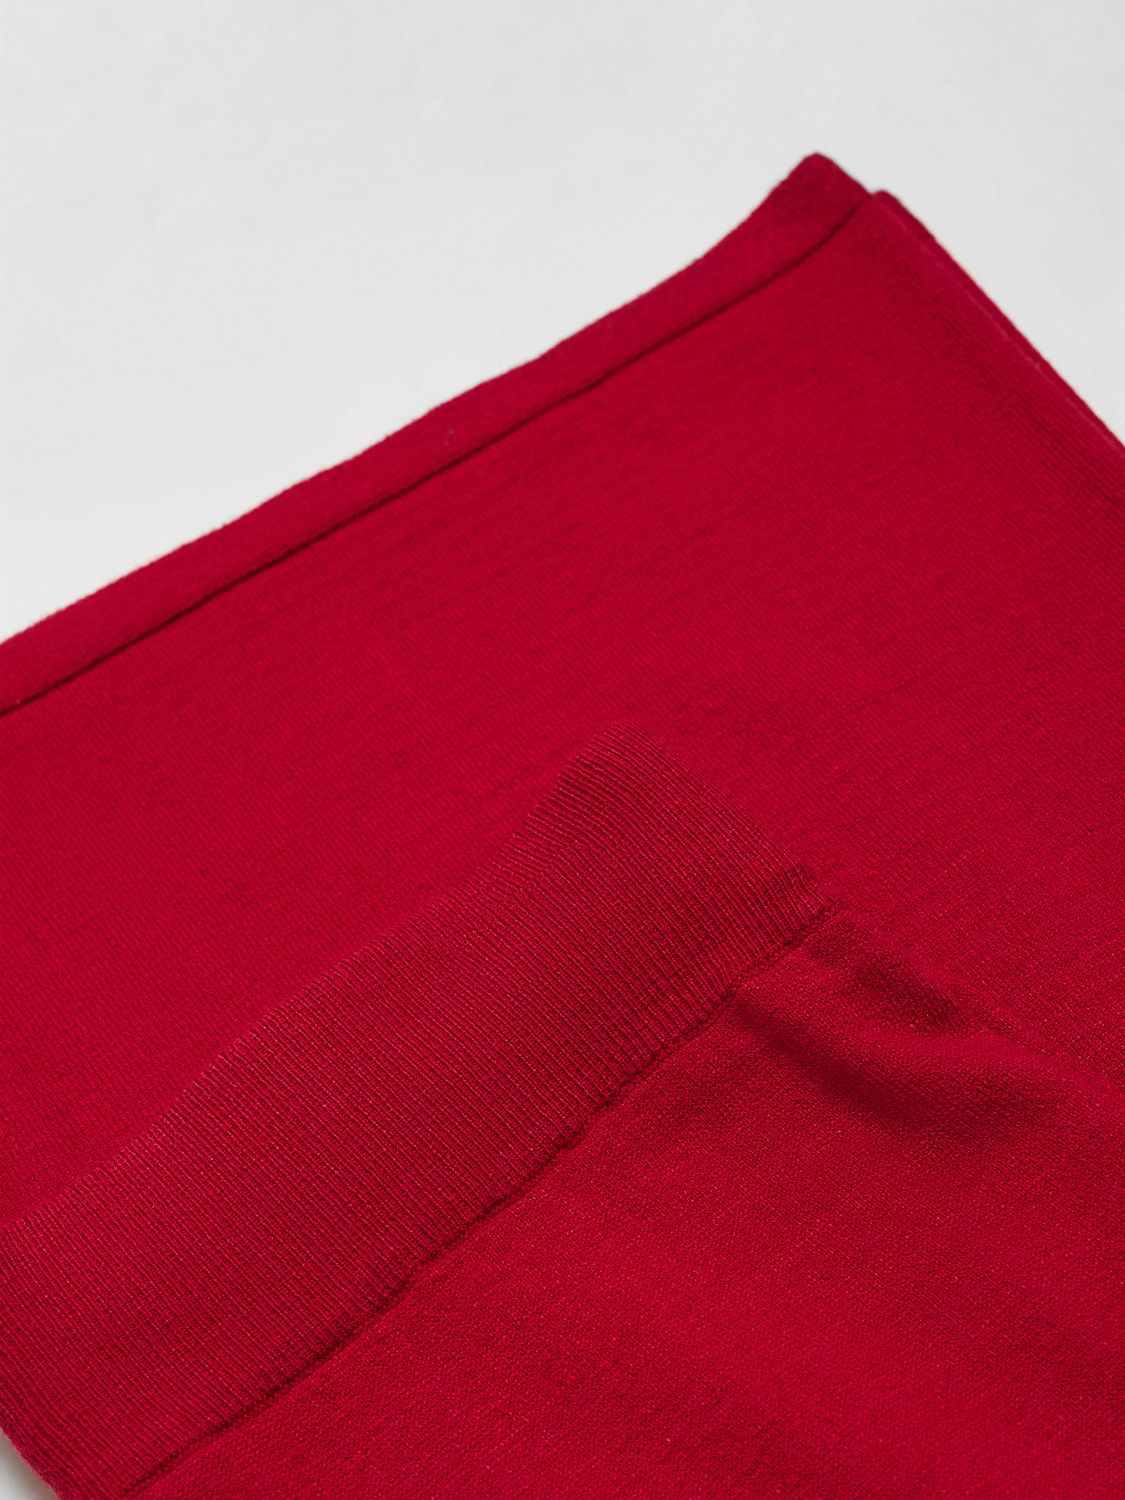 Mango Vieira Knitted Wide Leg Trousers, Red at John Lewis & Partners